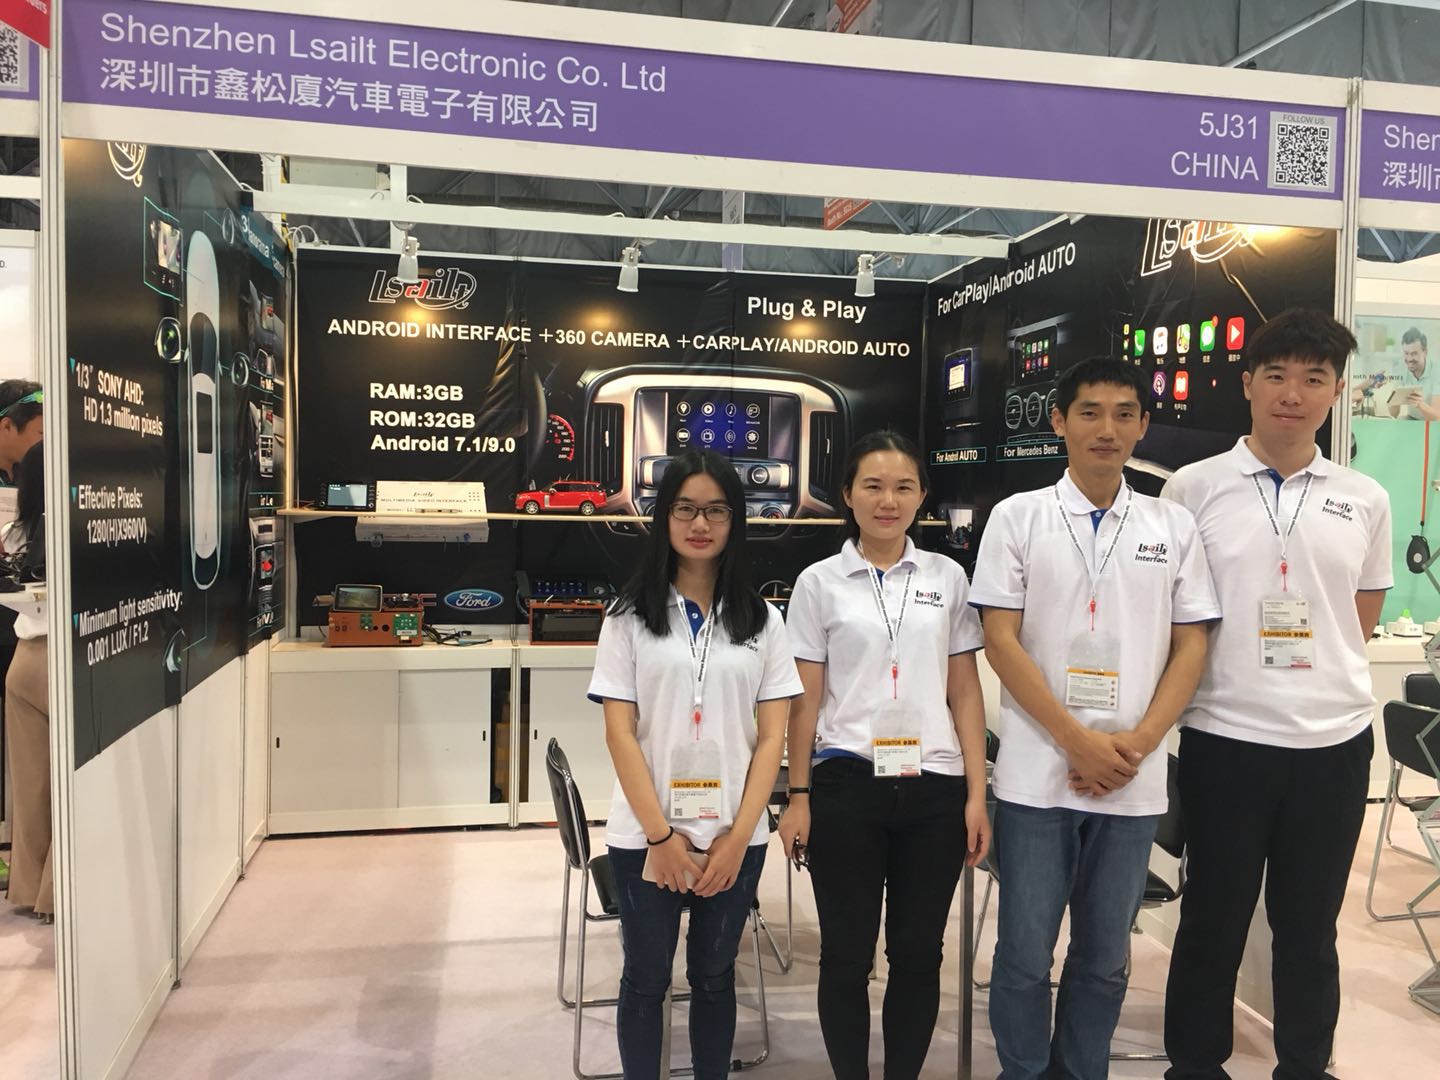 Global Sources 2019 Hong Kong Spring Electronics Fair successfully completed